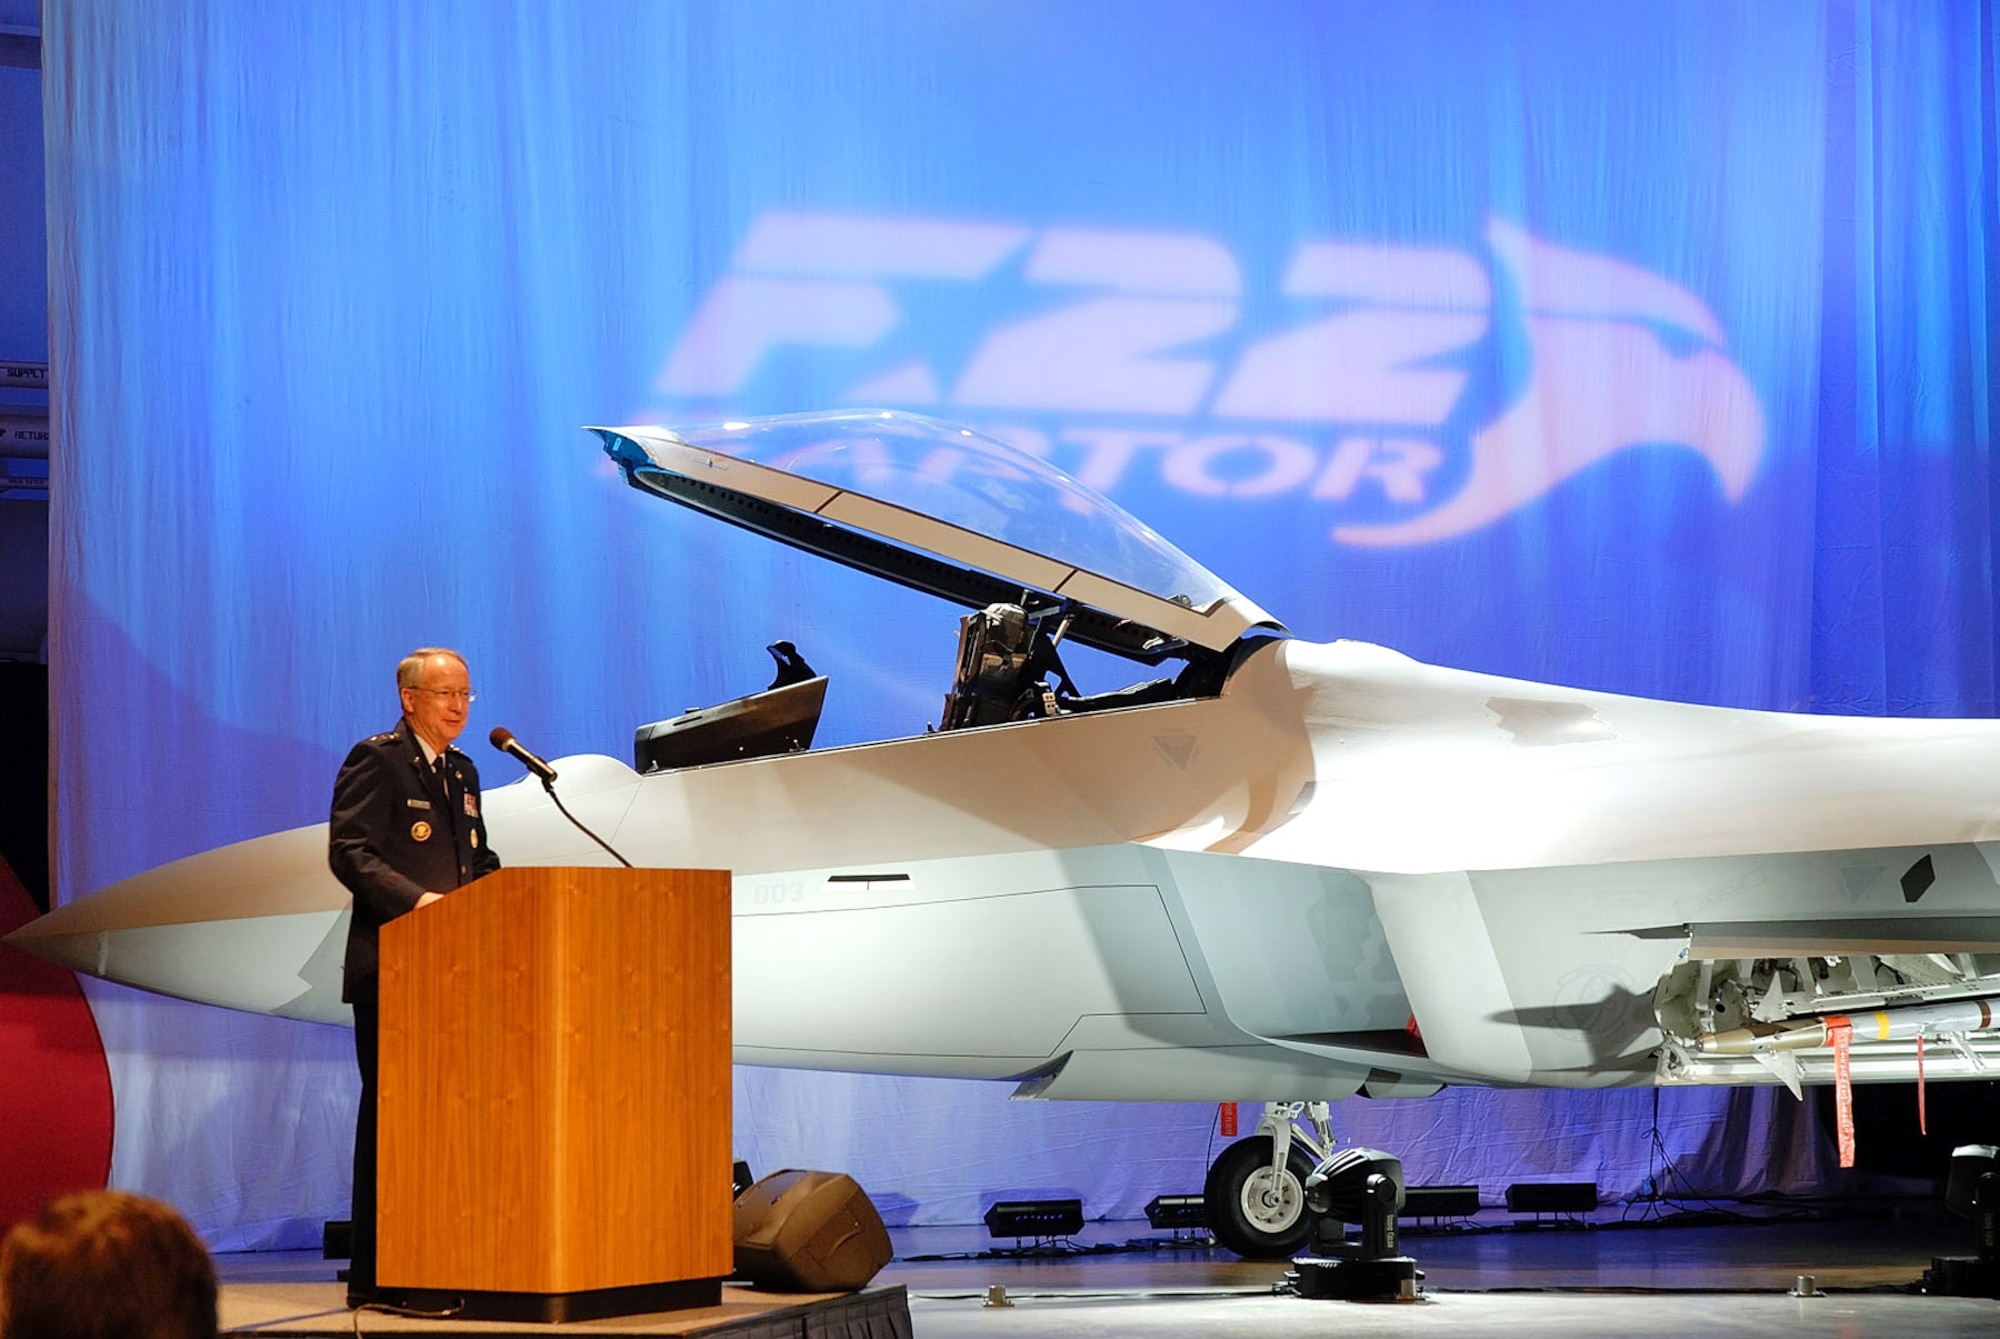 Lt. Gen. Frank G. Klotz addresses the crowd during the F-22 Raptor Exhibit Opening Ceremony at the National Museum of the U.S. Air Force Jan. 18 at Dayton, Ohio. General Klotz is the the assistant vice chief of staff and director of the Air Force staff. (U.S. Air Force photo)
